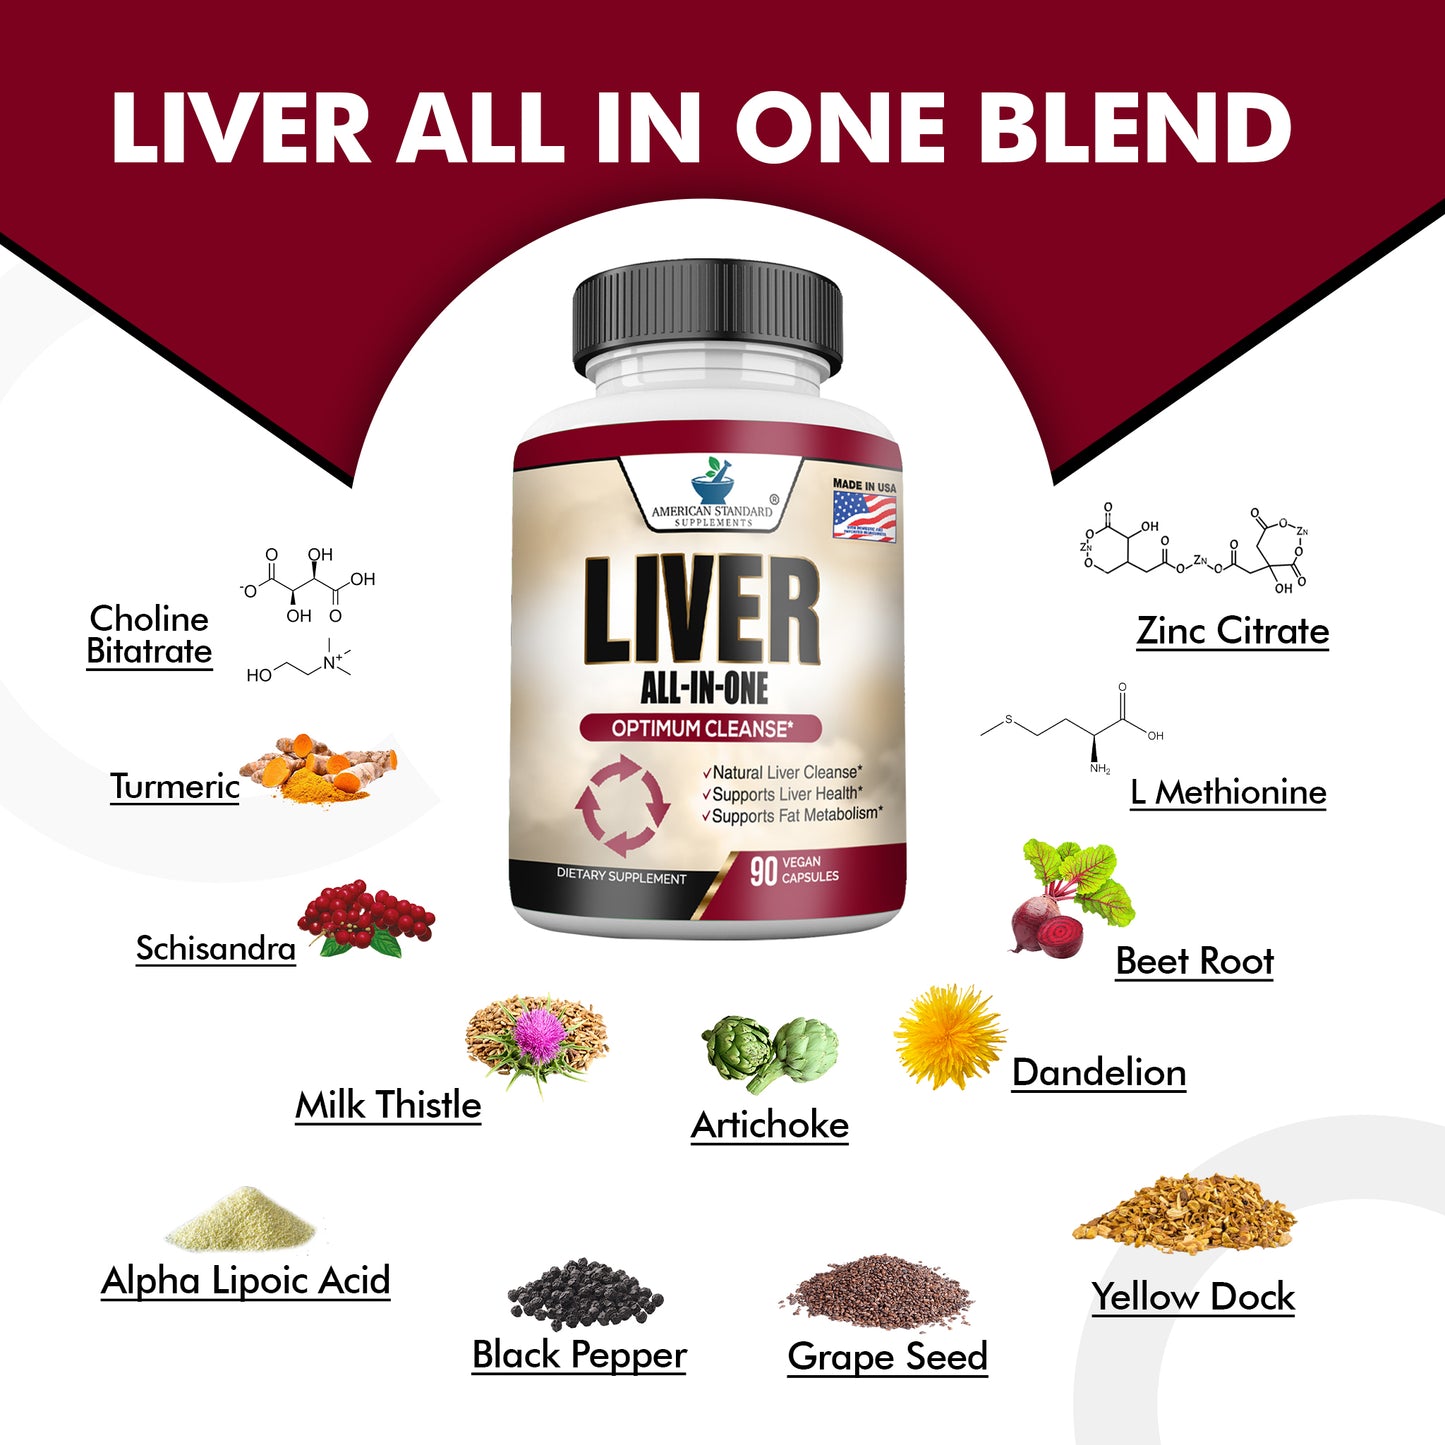 Liver Cleanse - American Standard Supplements